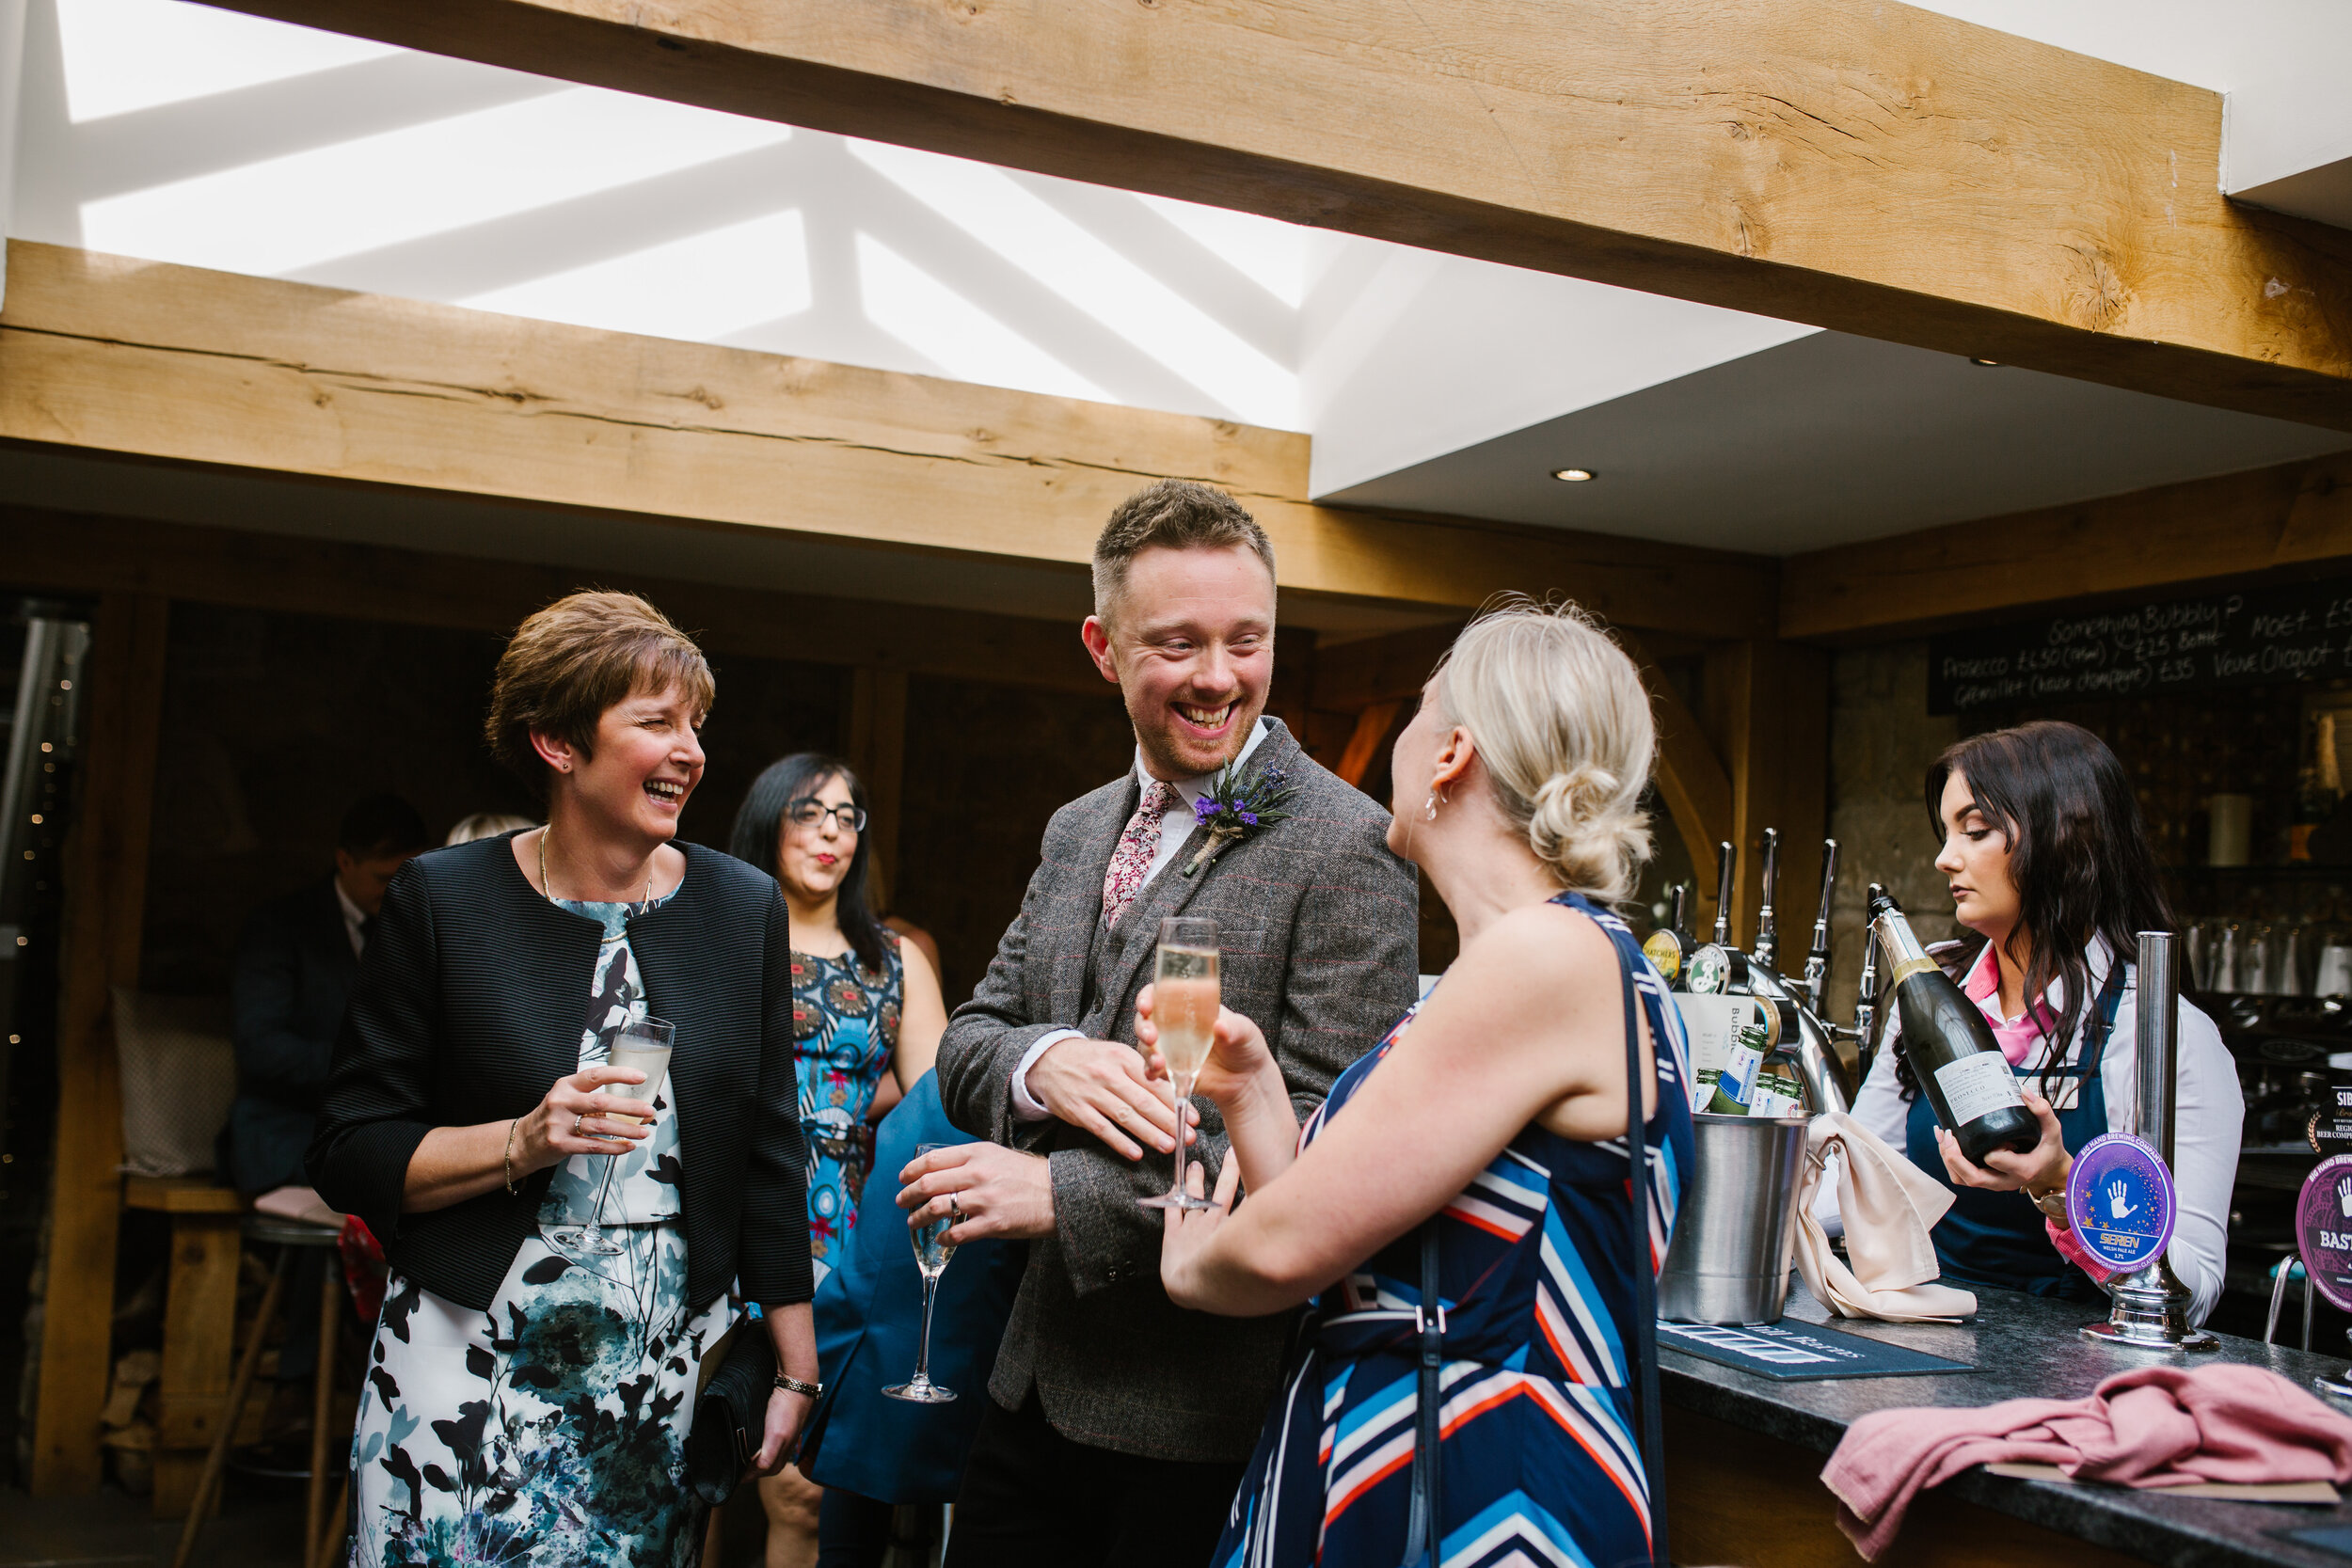 a candid photo of the groom mingling with his guests at their wedding at tower hill barns